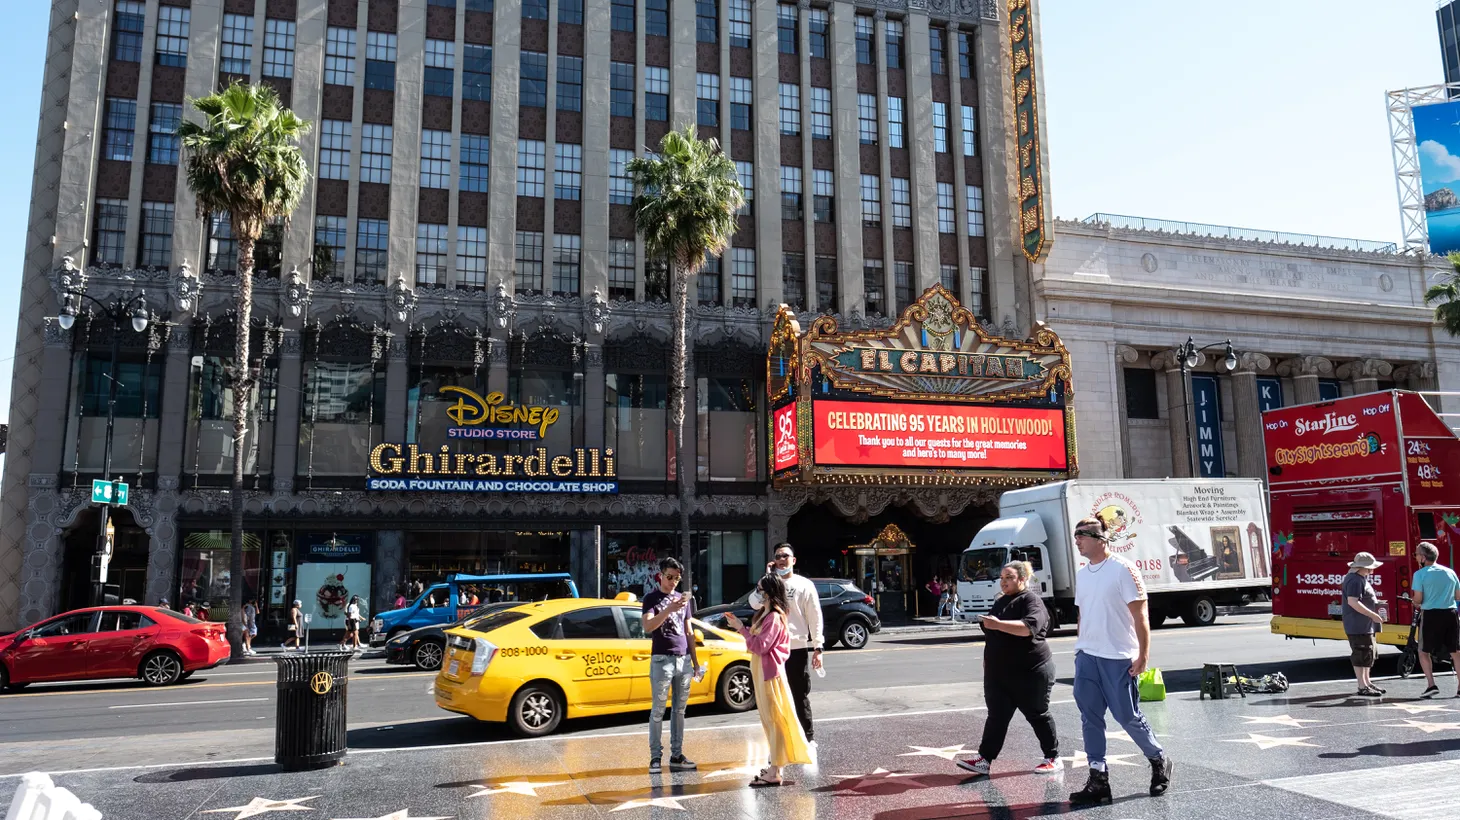 People stroll along the Hollywood Walk of Fame in front of the El Capitan Theatre in Hollywood, California.